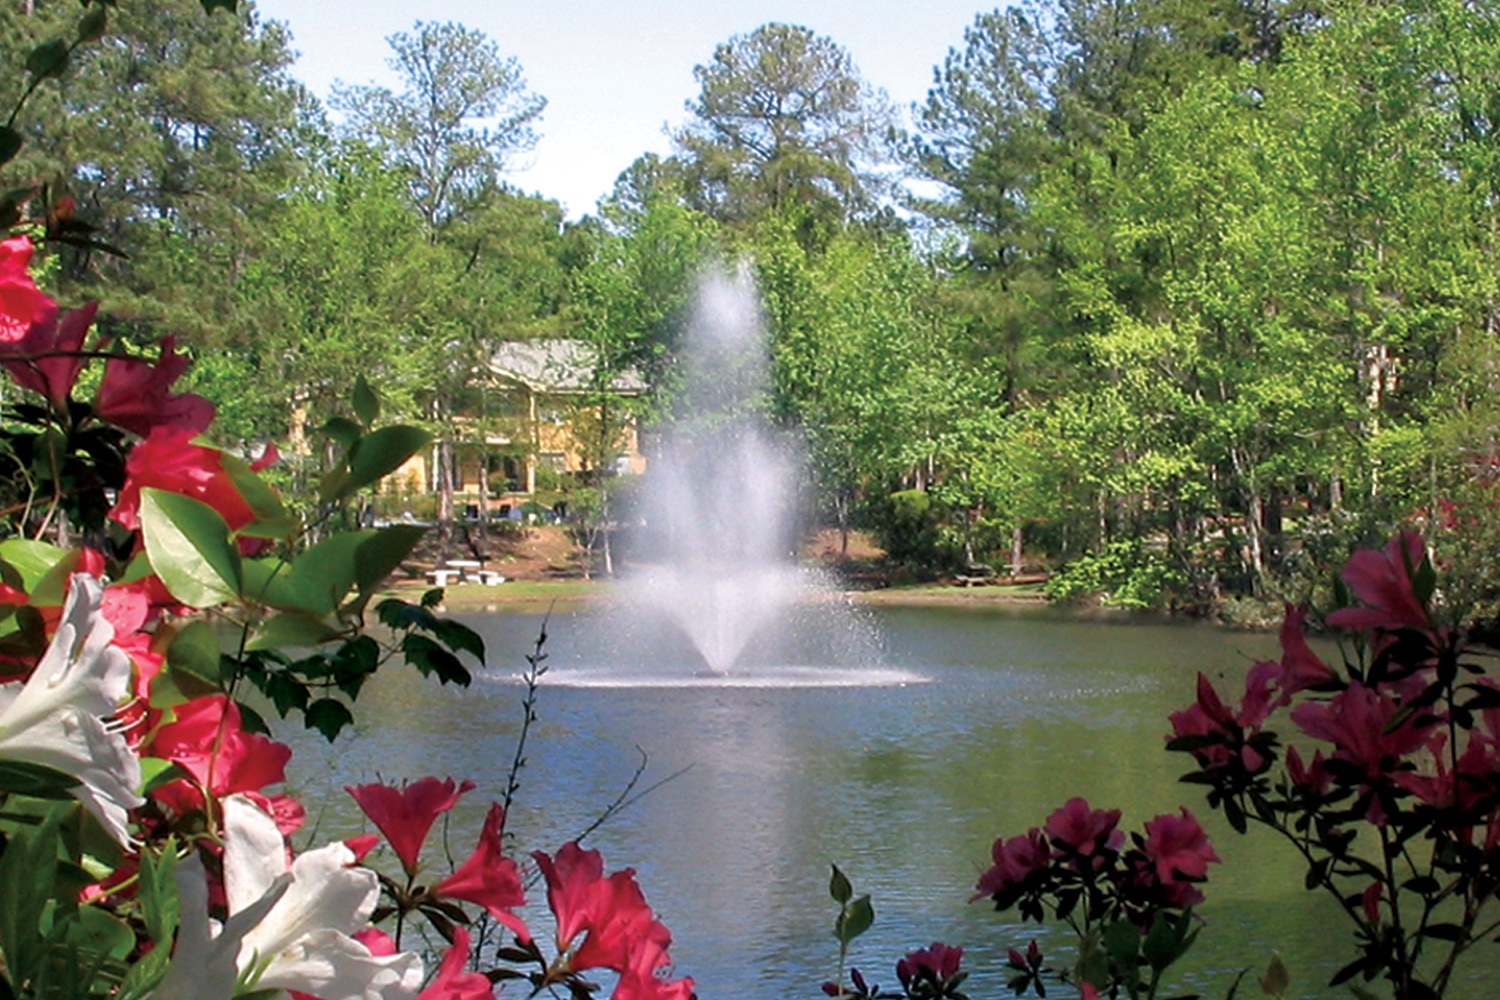 One of Otterbine's Residential Aerating Fountains